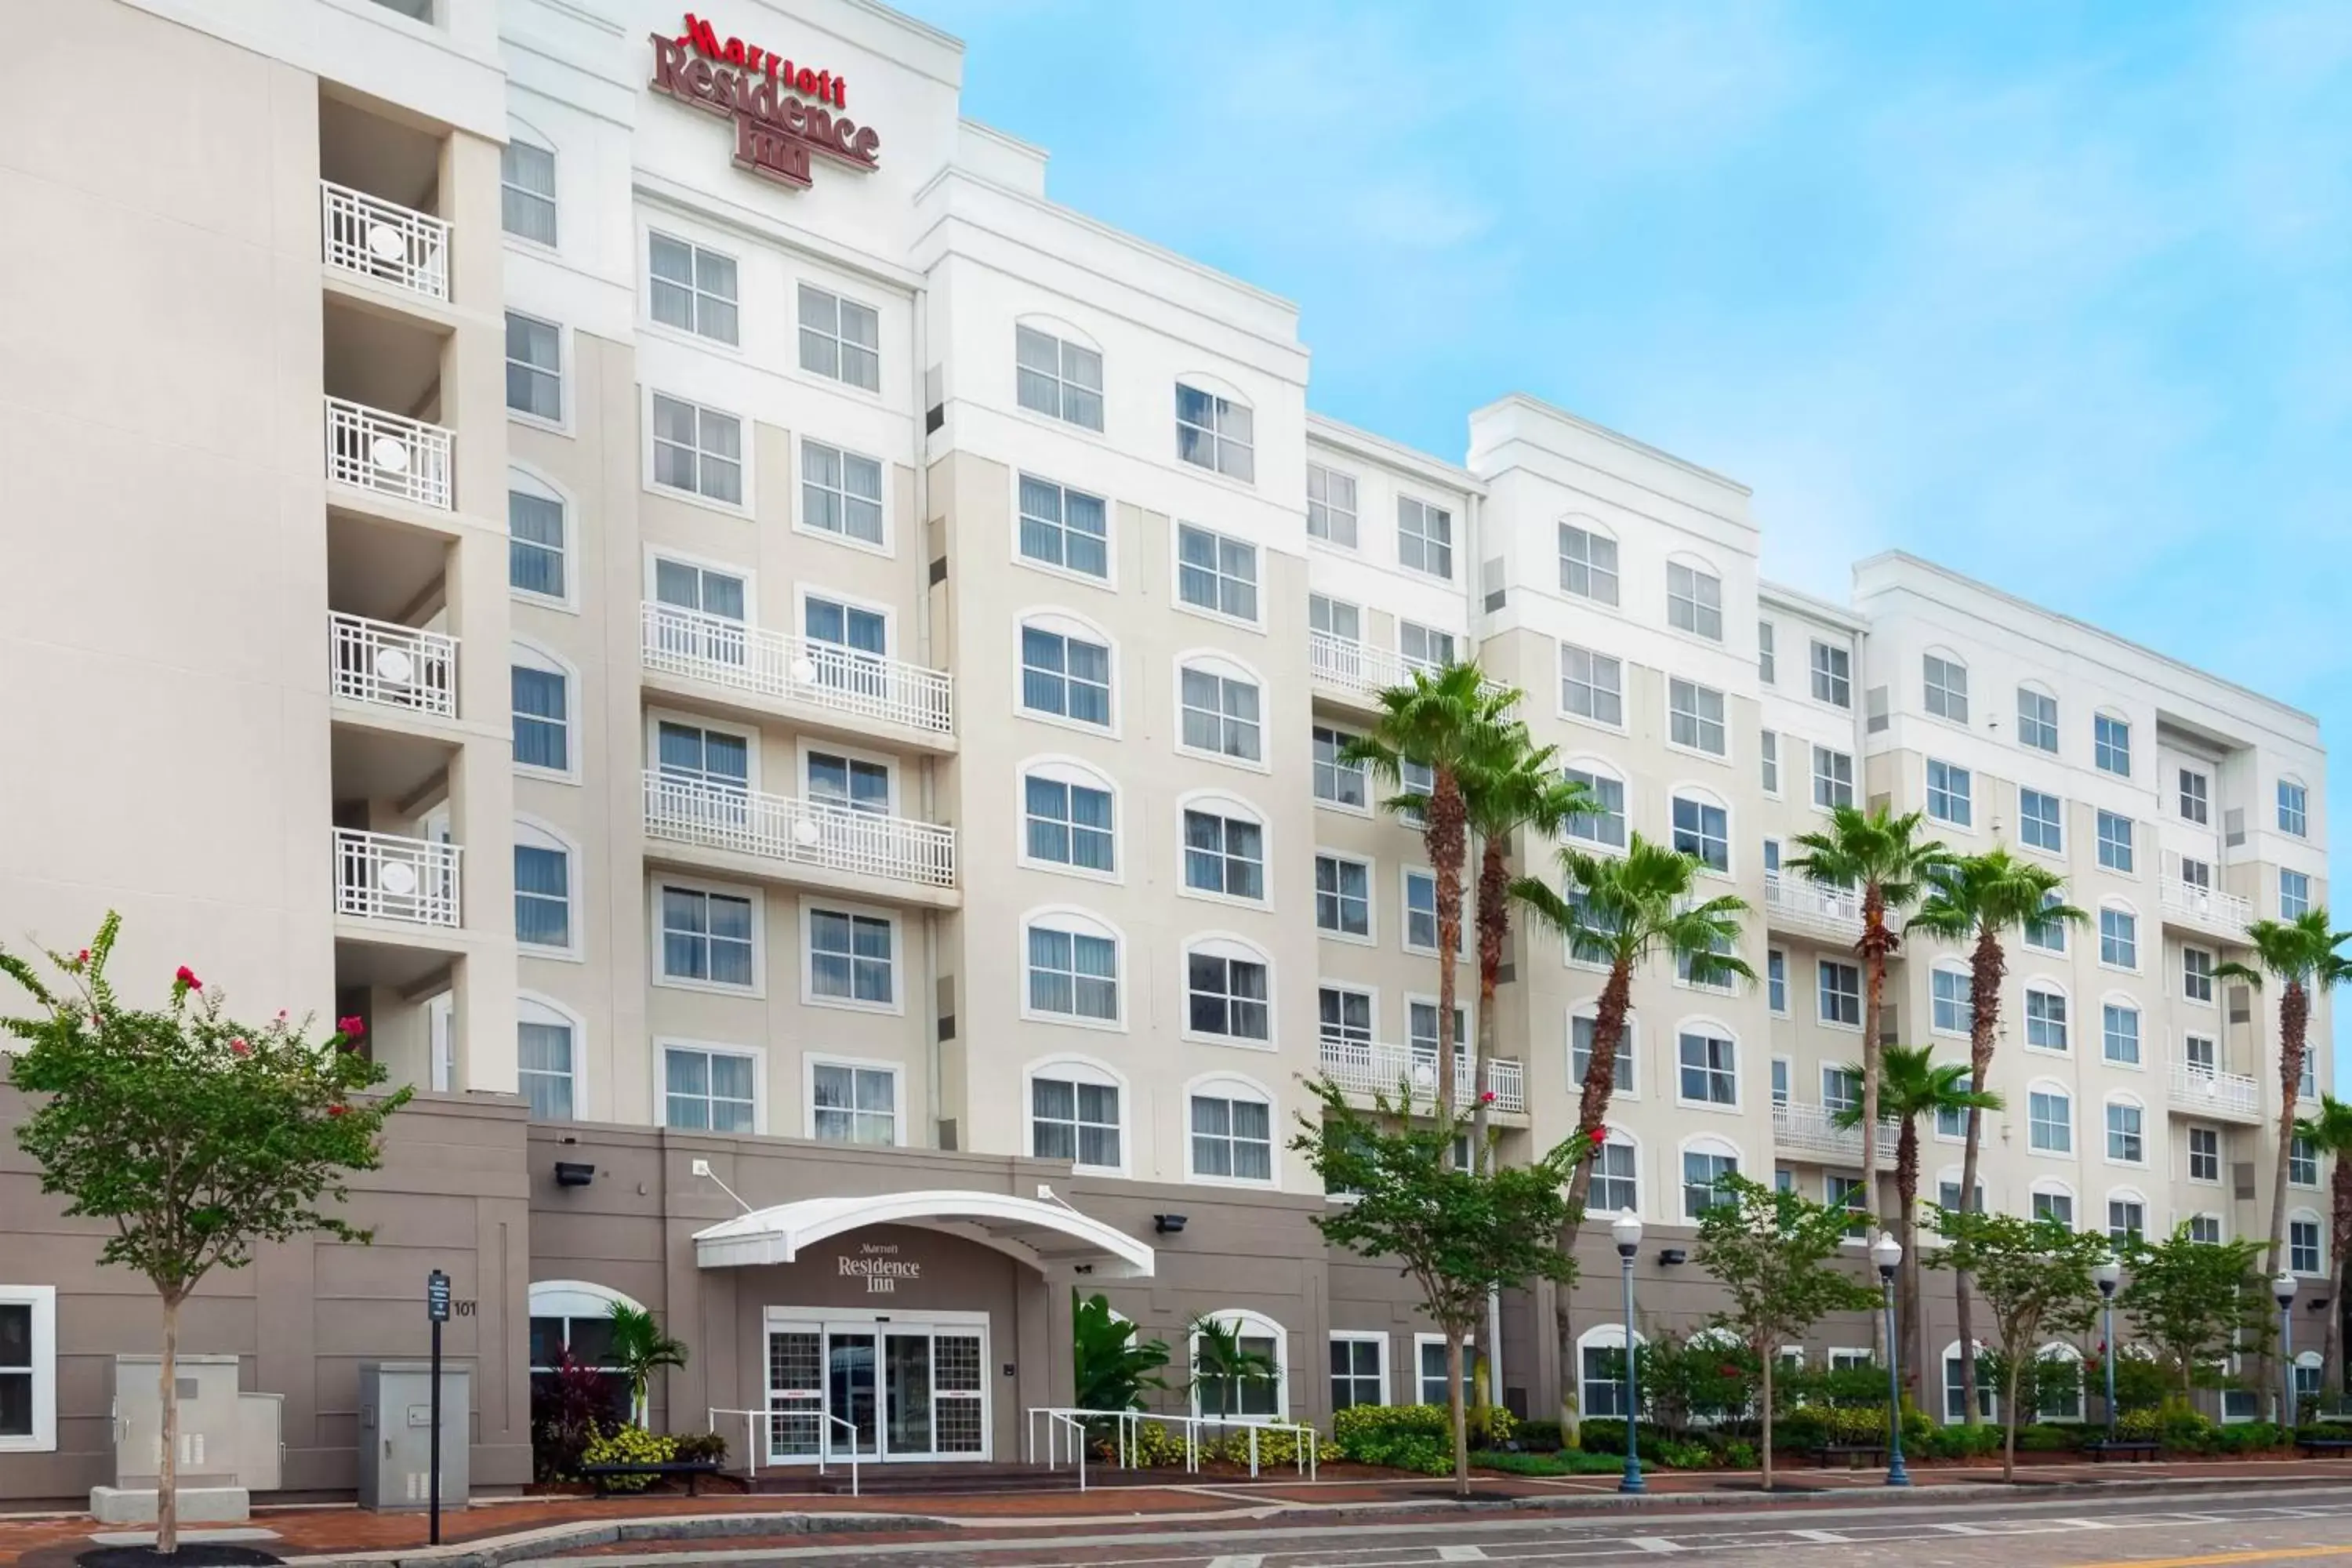 Property Building in Residence Inn Tampa Downtown